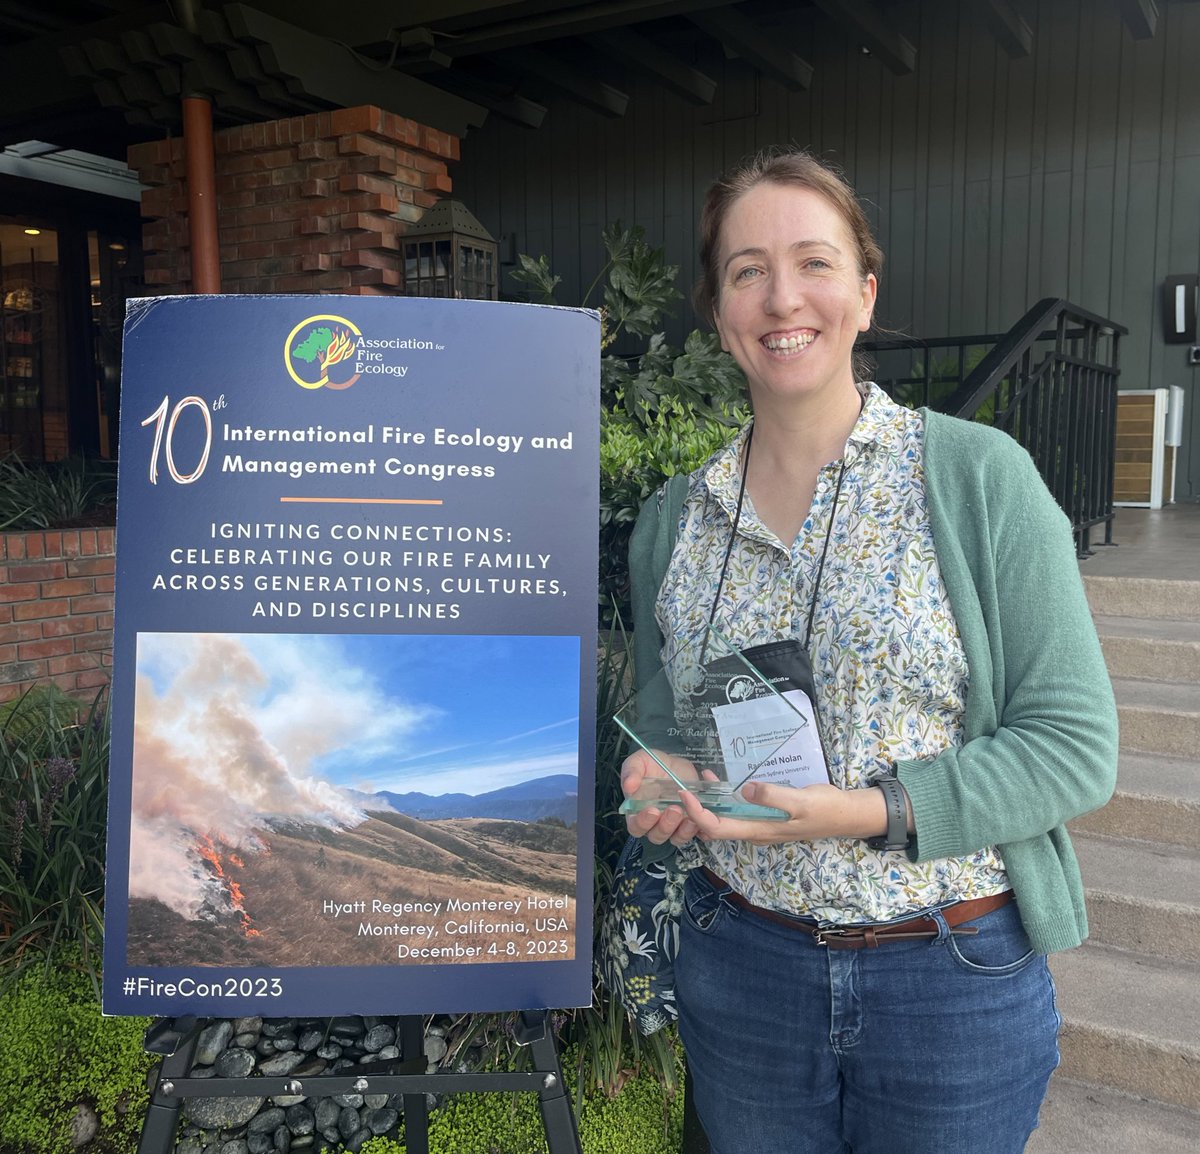 Rachael just received the AFE 2023 Early Career Award for her many outstanding contributions to fire science. No one is more deserving of such an honour! Congratulations @Rachael_H_Nolan!

#FireCon2023 @fireecology